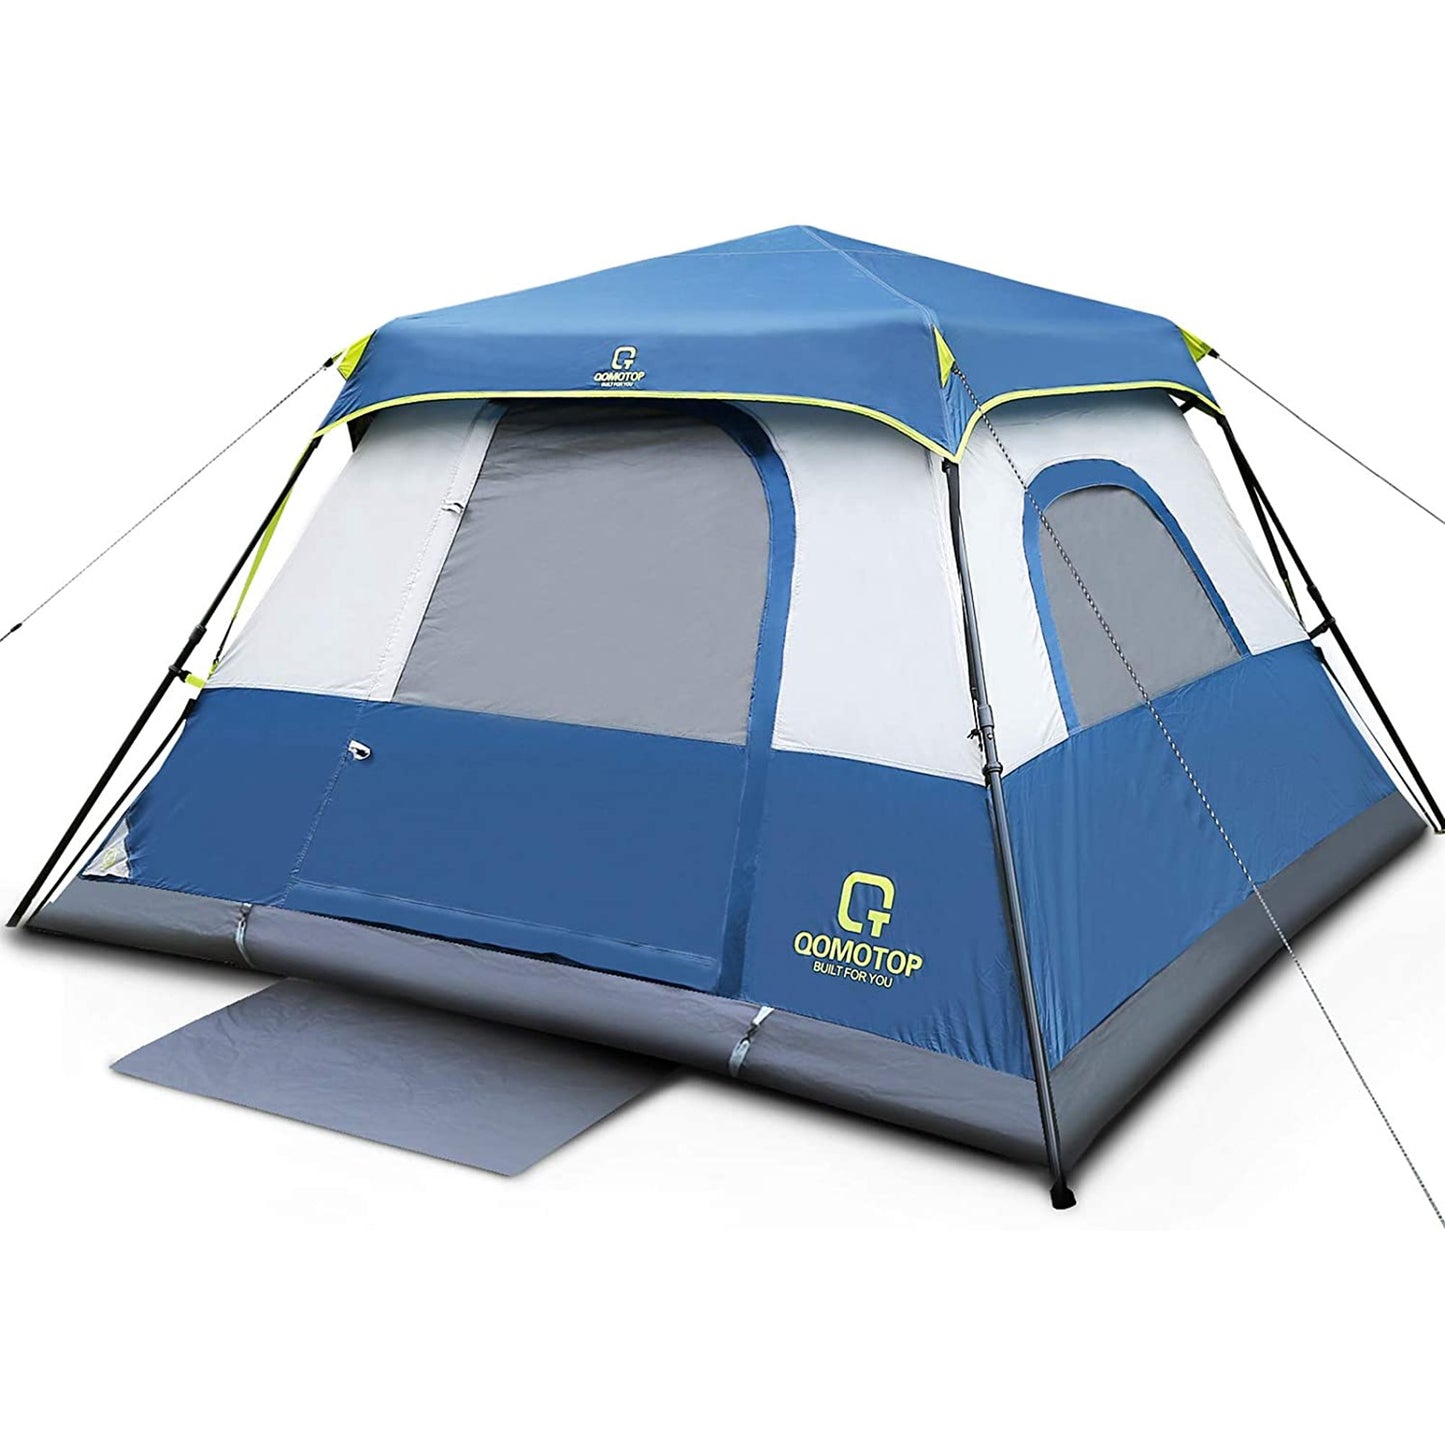 QOMOTOP 6 Person 60 Seconds Set Up Camping Tent, Waterproof Pop Up Tent with Top Rainfly, Instant Cabin Tent, Blue